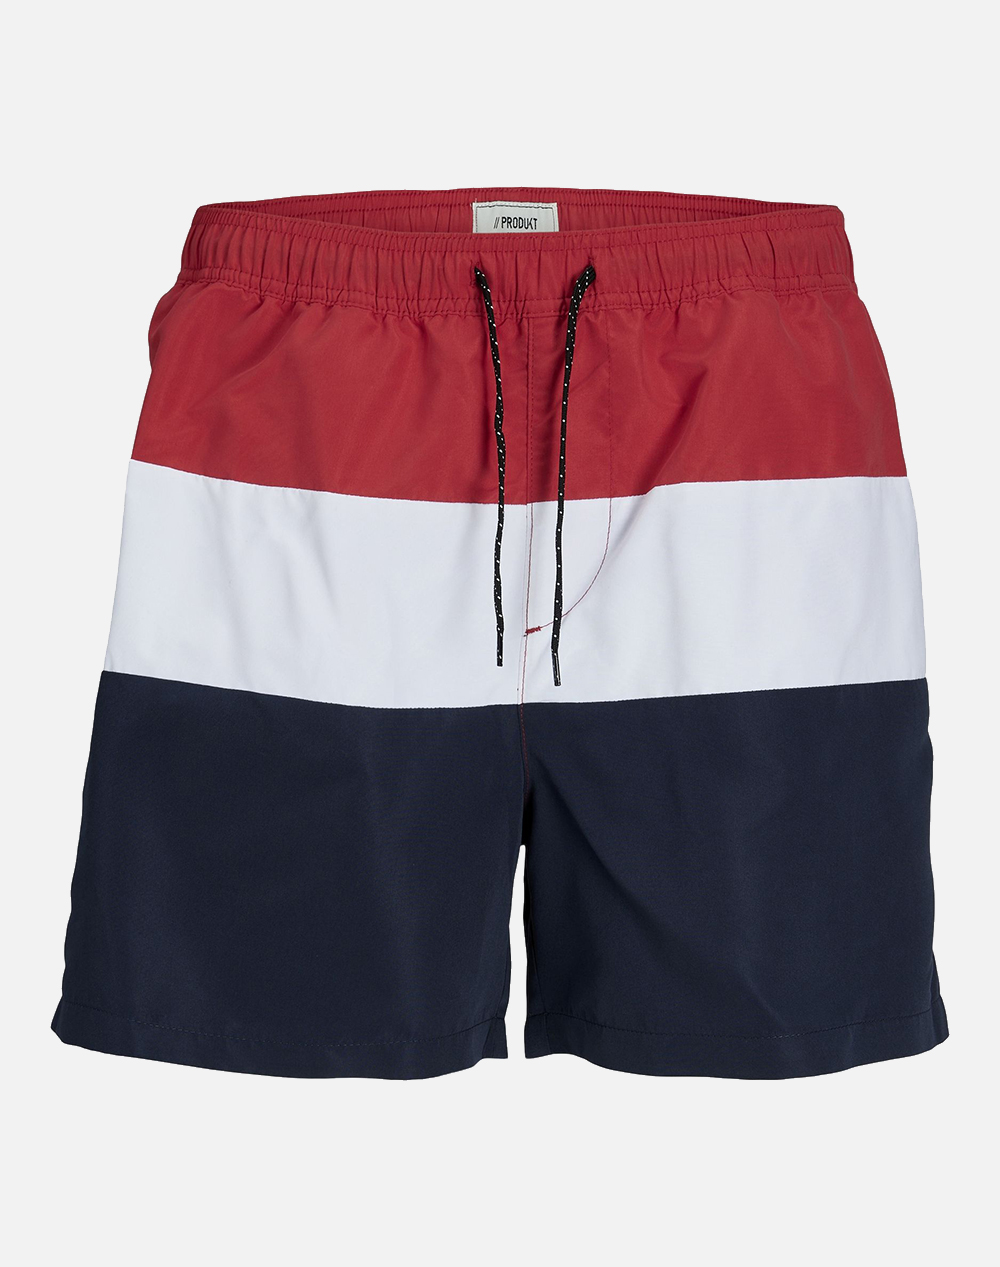 PRODUCT PKTAKM COLORBLOCK SWIMSHORTS 12252194-Chinese Red Red